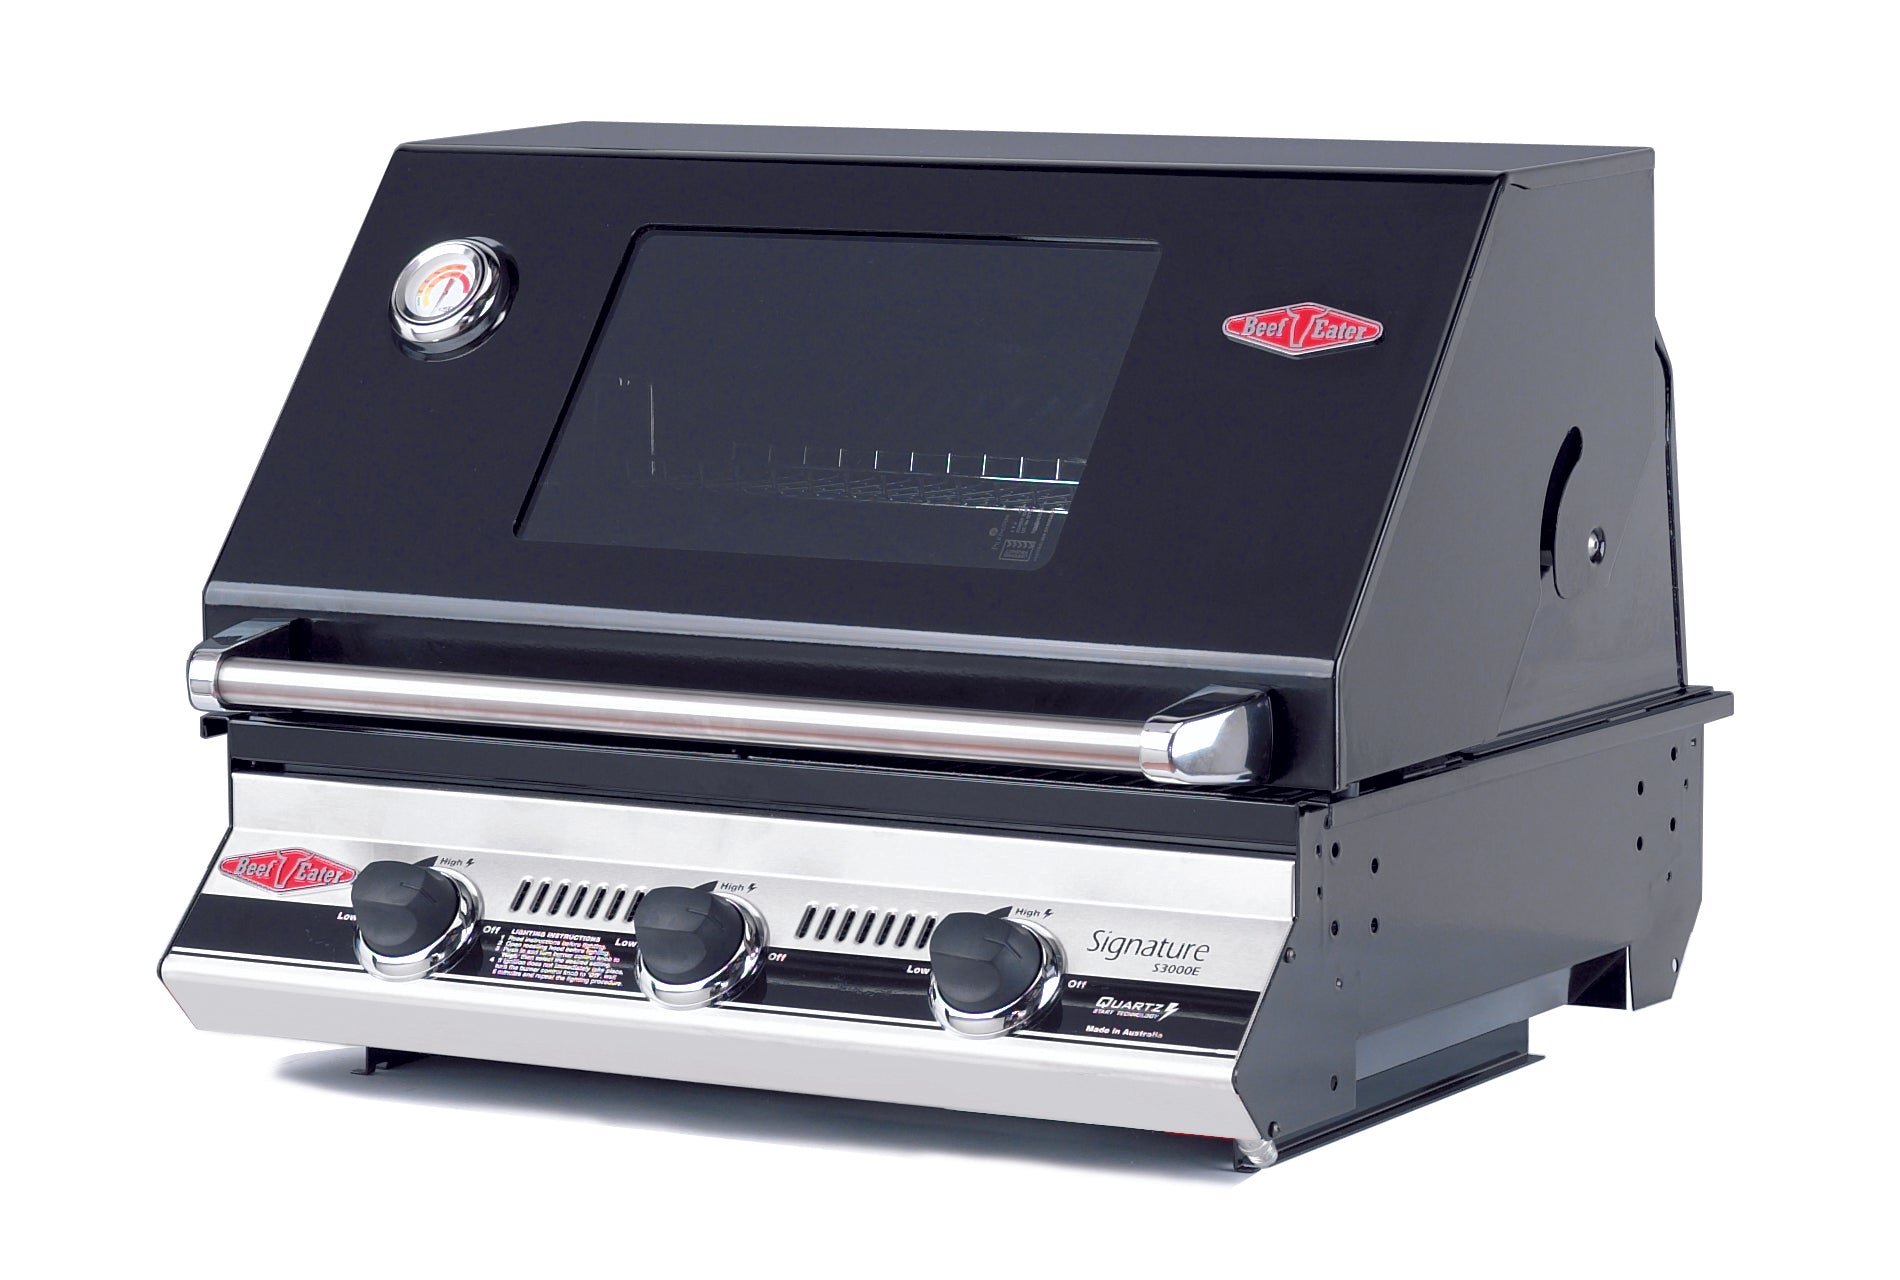 Beefeater - 1200E Series 3 Burner Built In Barbecue